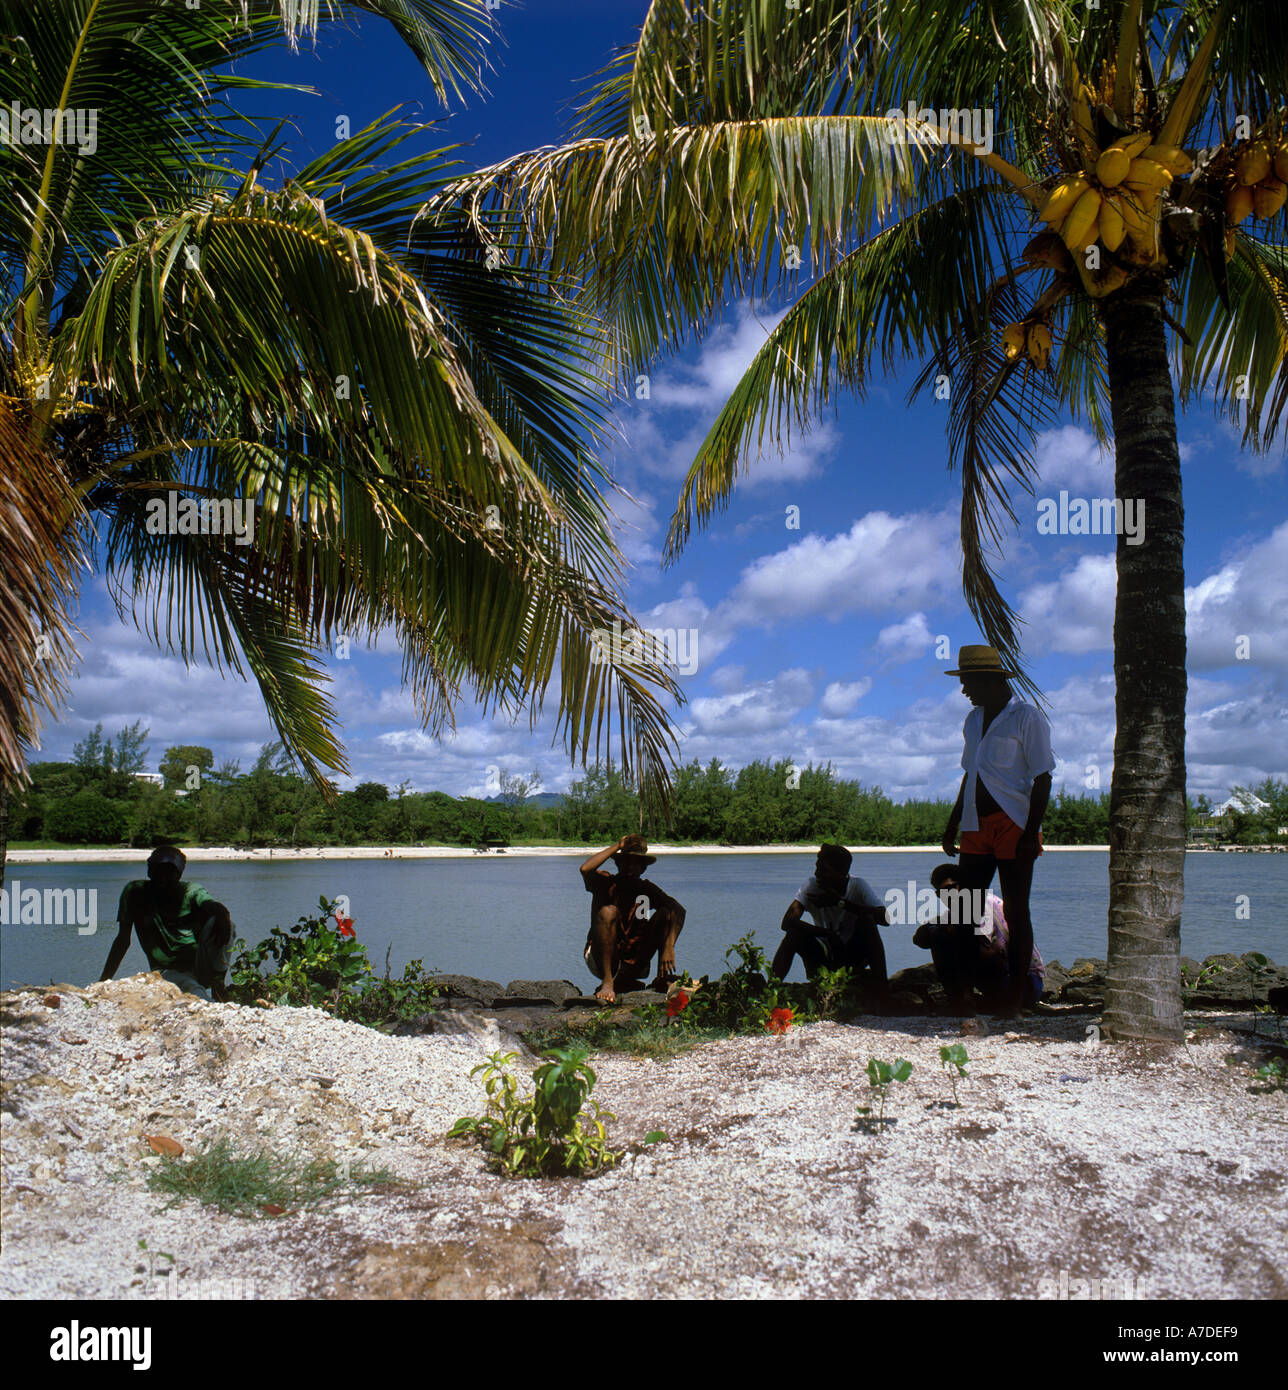 Mauritian men sheltering from the sun under palm trees by seashore, Troux-aux-Cerfs, island beach and trees visible behind, Mauritius, Indian Ocean Stock Photo